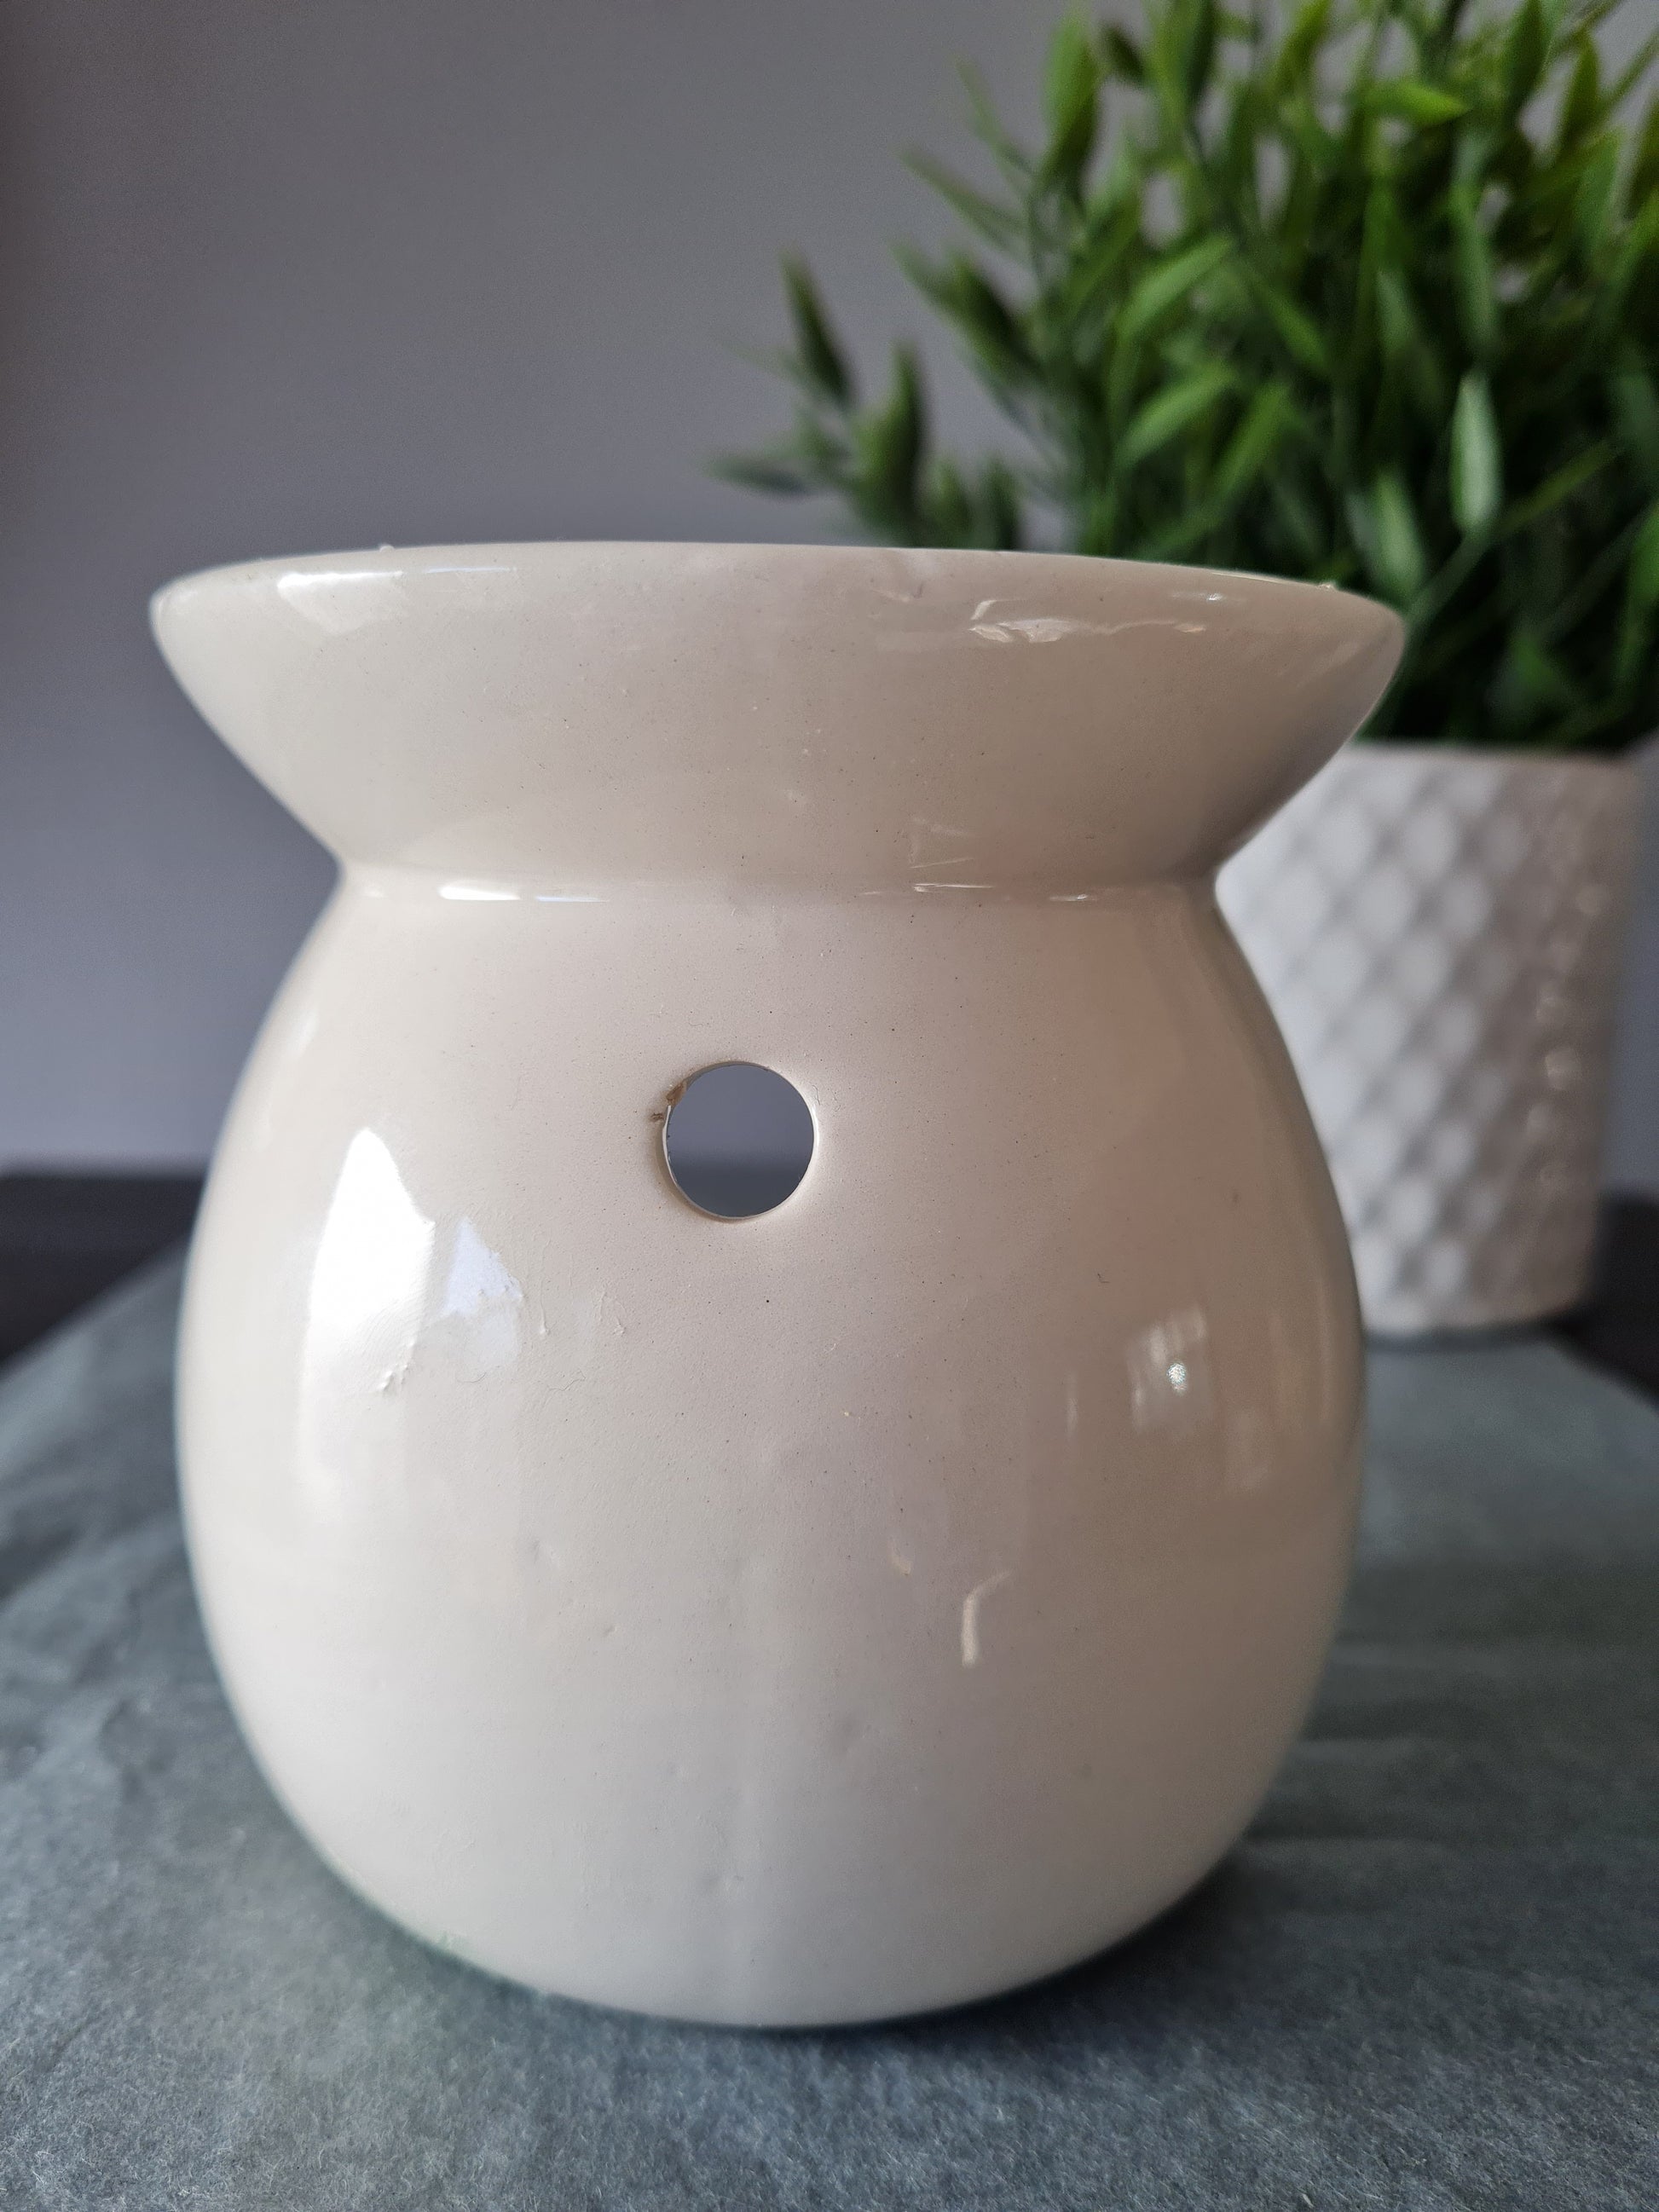 Sit back and breathe in a beautiful wax melt with the help of this stylish oil and wax burner. The simple design features a small dish, with a hollow and circular inside for the candle to be placed into. A minimalist white colour that will complement any other room decor. Discover our stunning range of wax melts here!